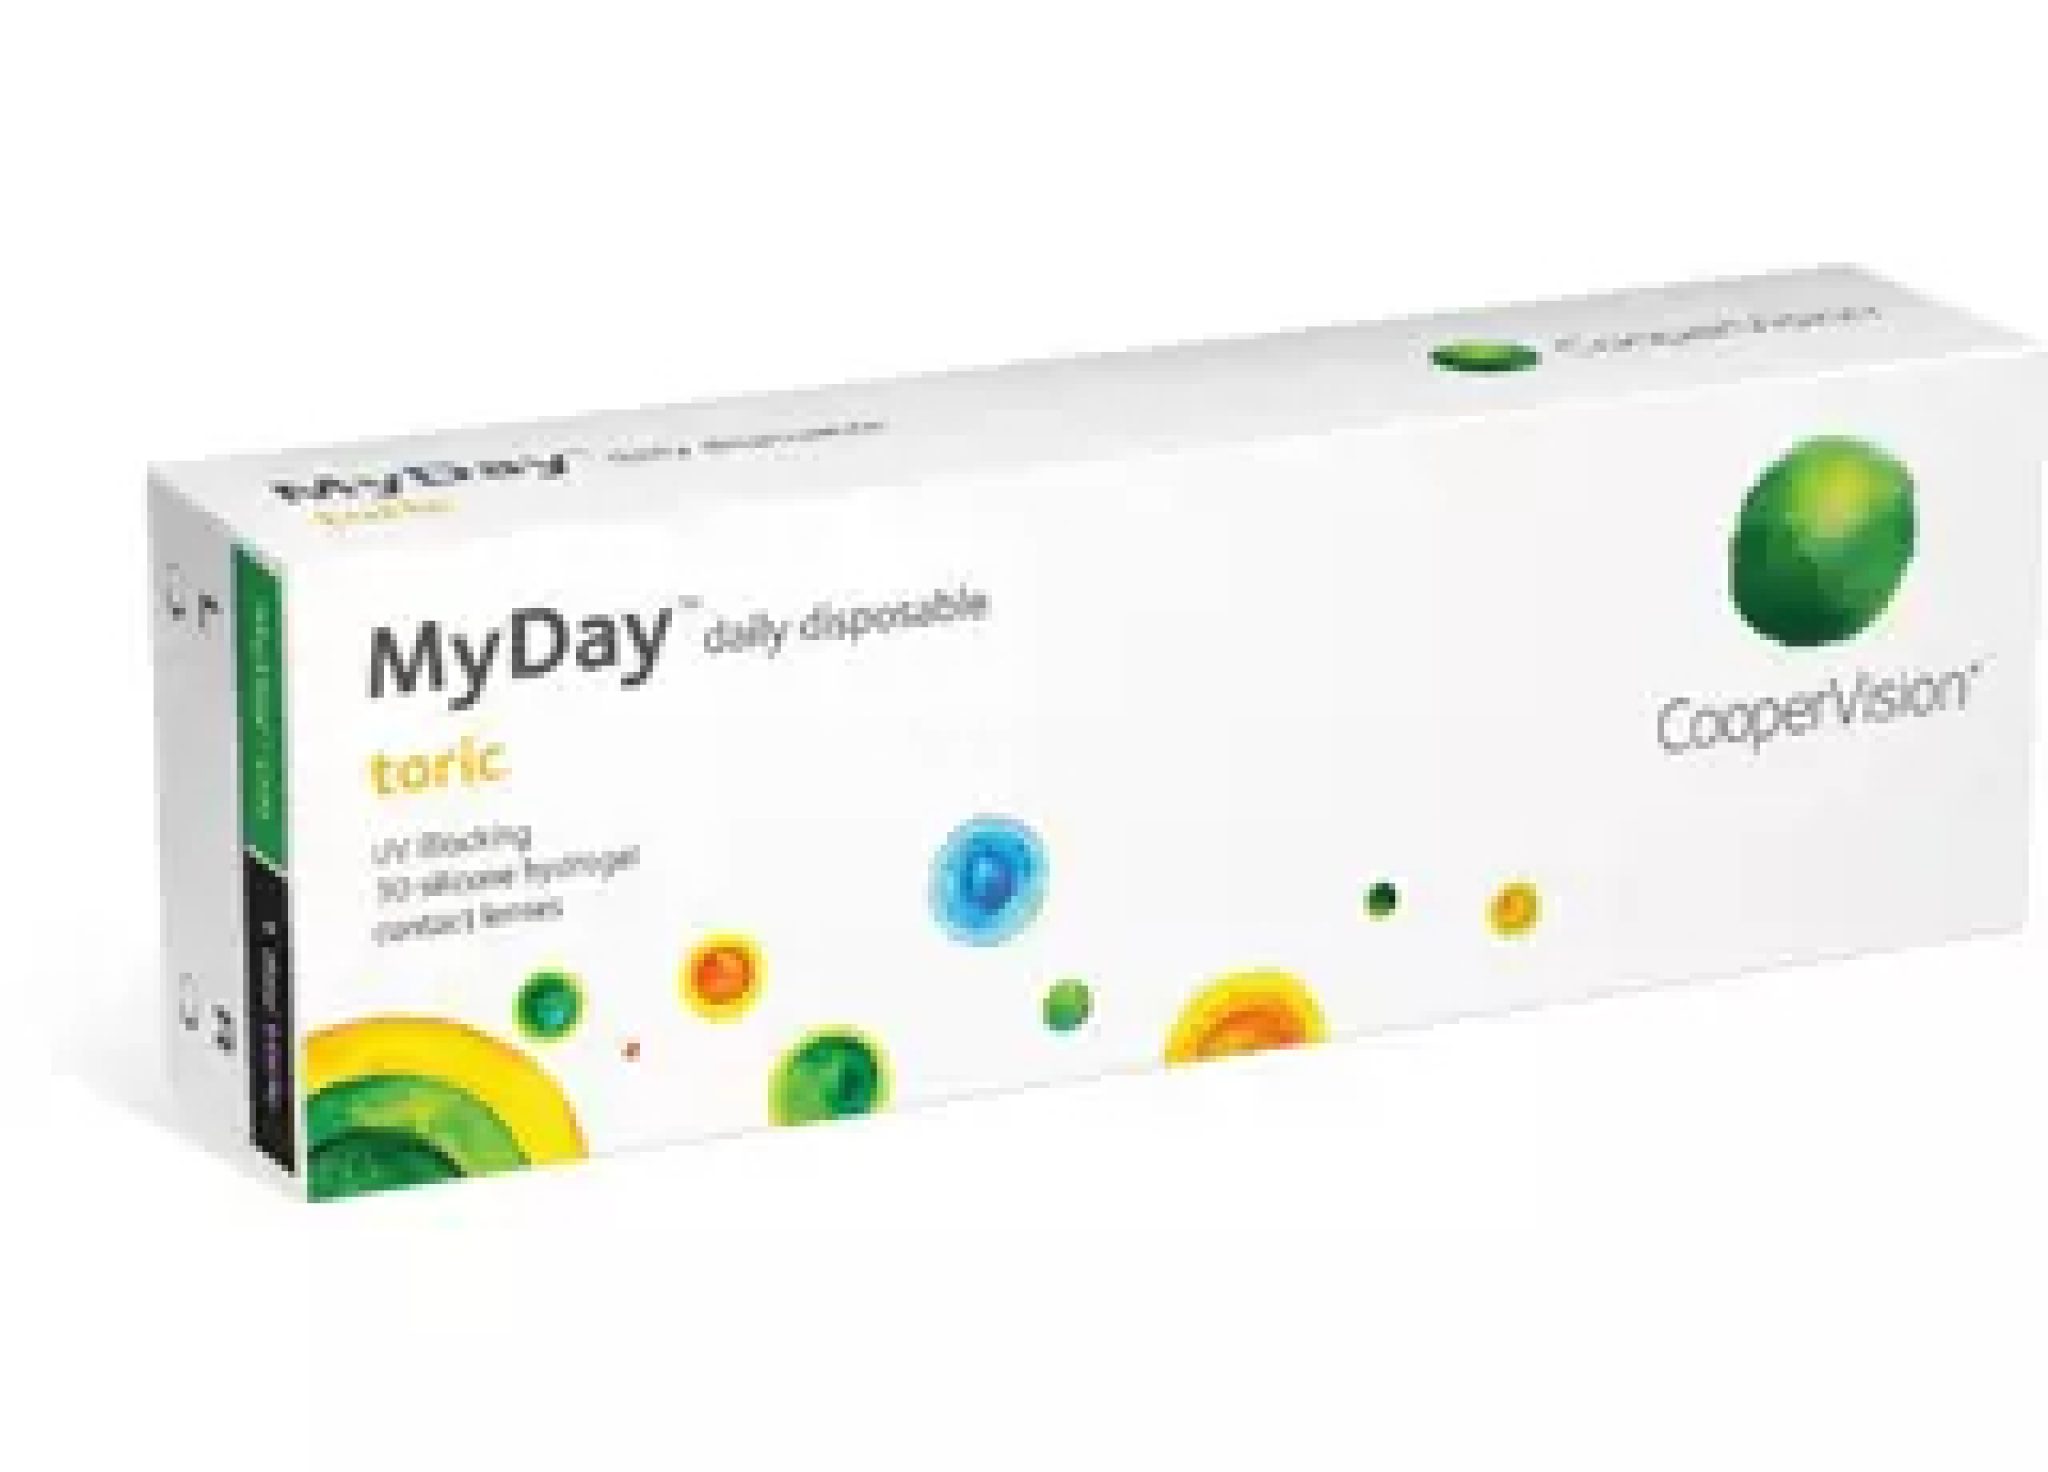 myday-toric-contact-lens-30-pack-price-comparison-new-zealand